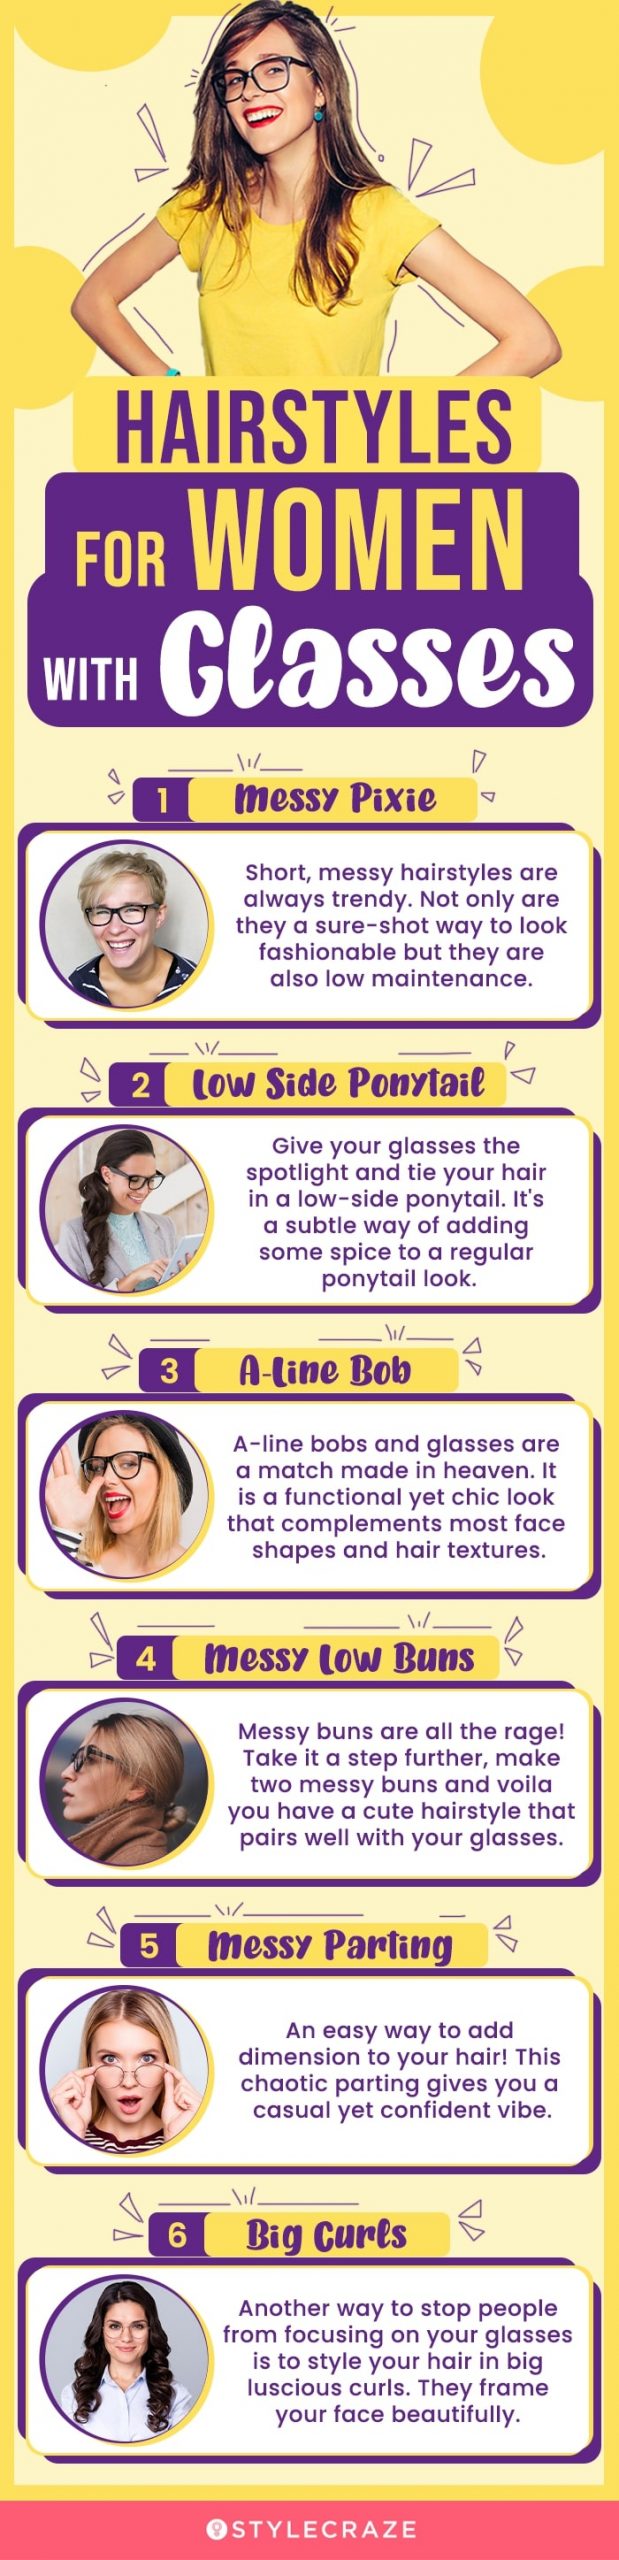 hairstyles for women with glasses (infographic)